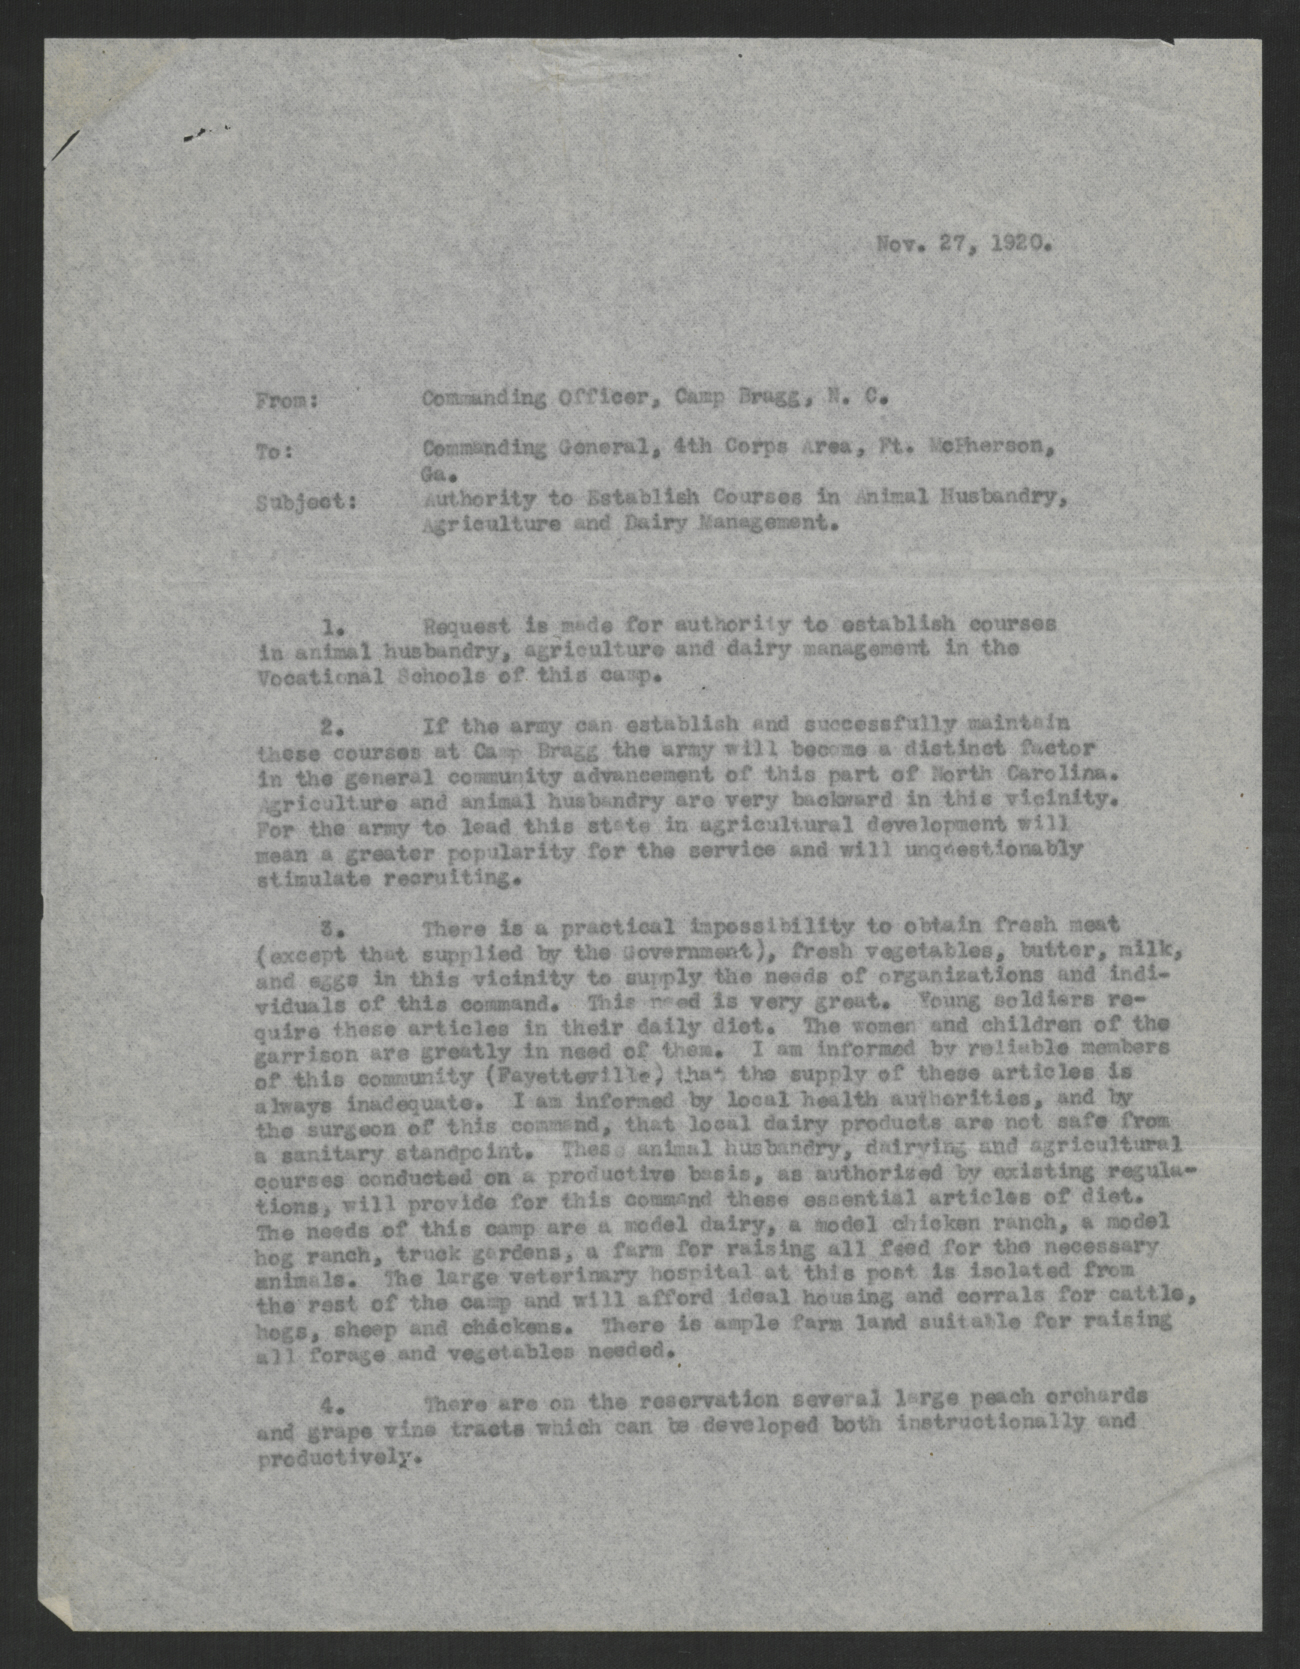 Letter from Albert J. Bowley to the Commanding General of the 4th Corps, November 27, 1920, page 1